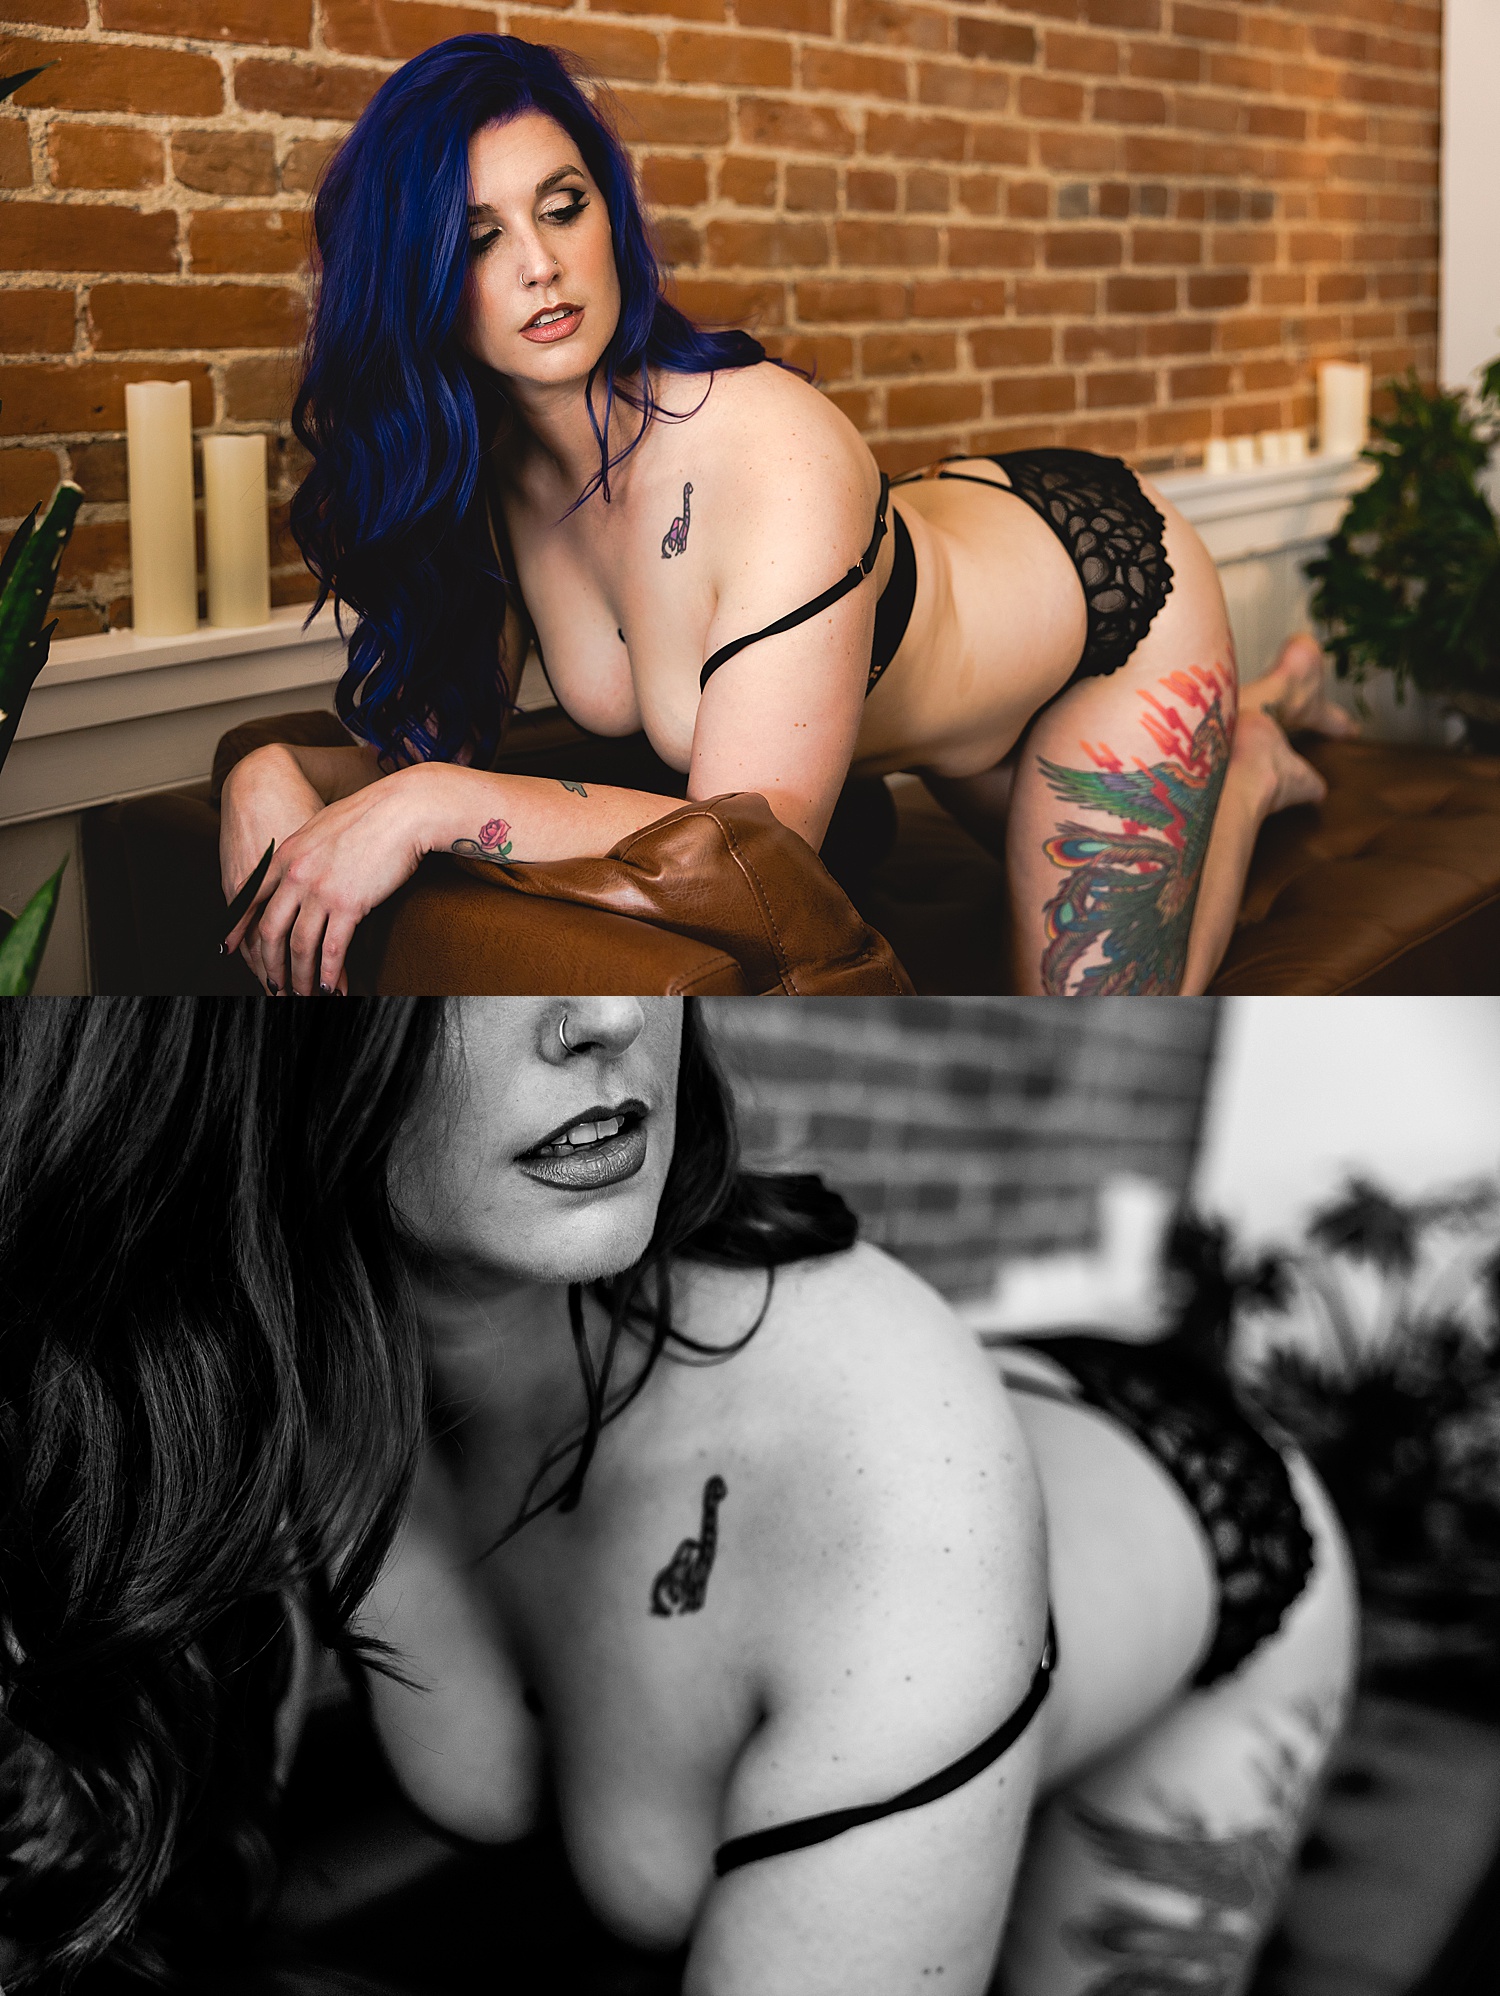 Woman with blue hair wearing black lace lingerie with Kansas City put war photographer